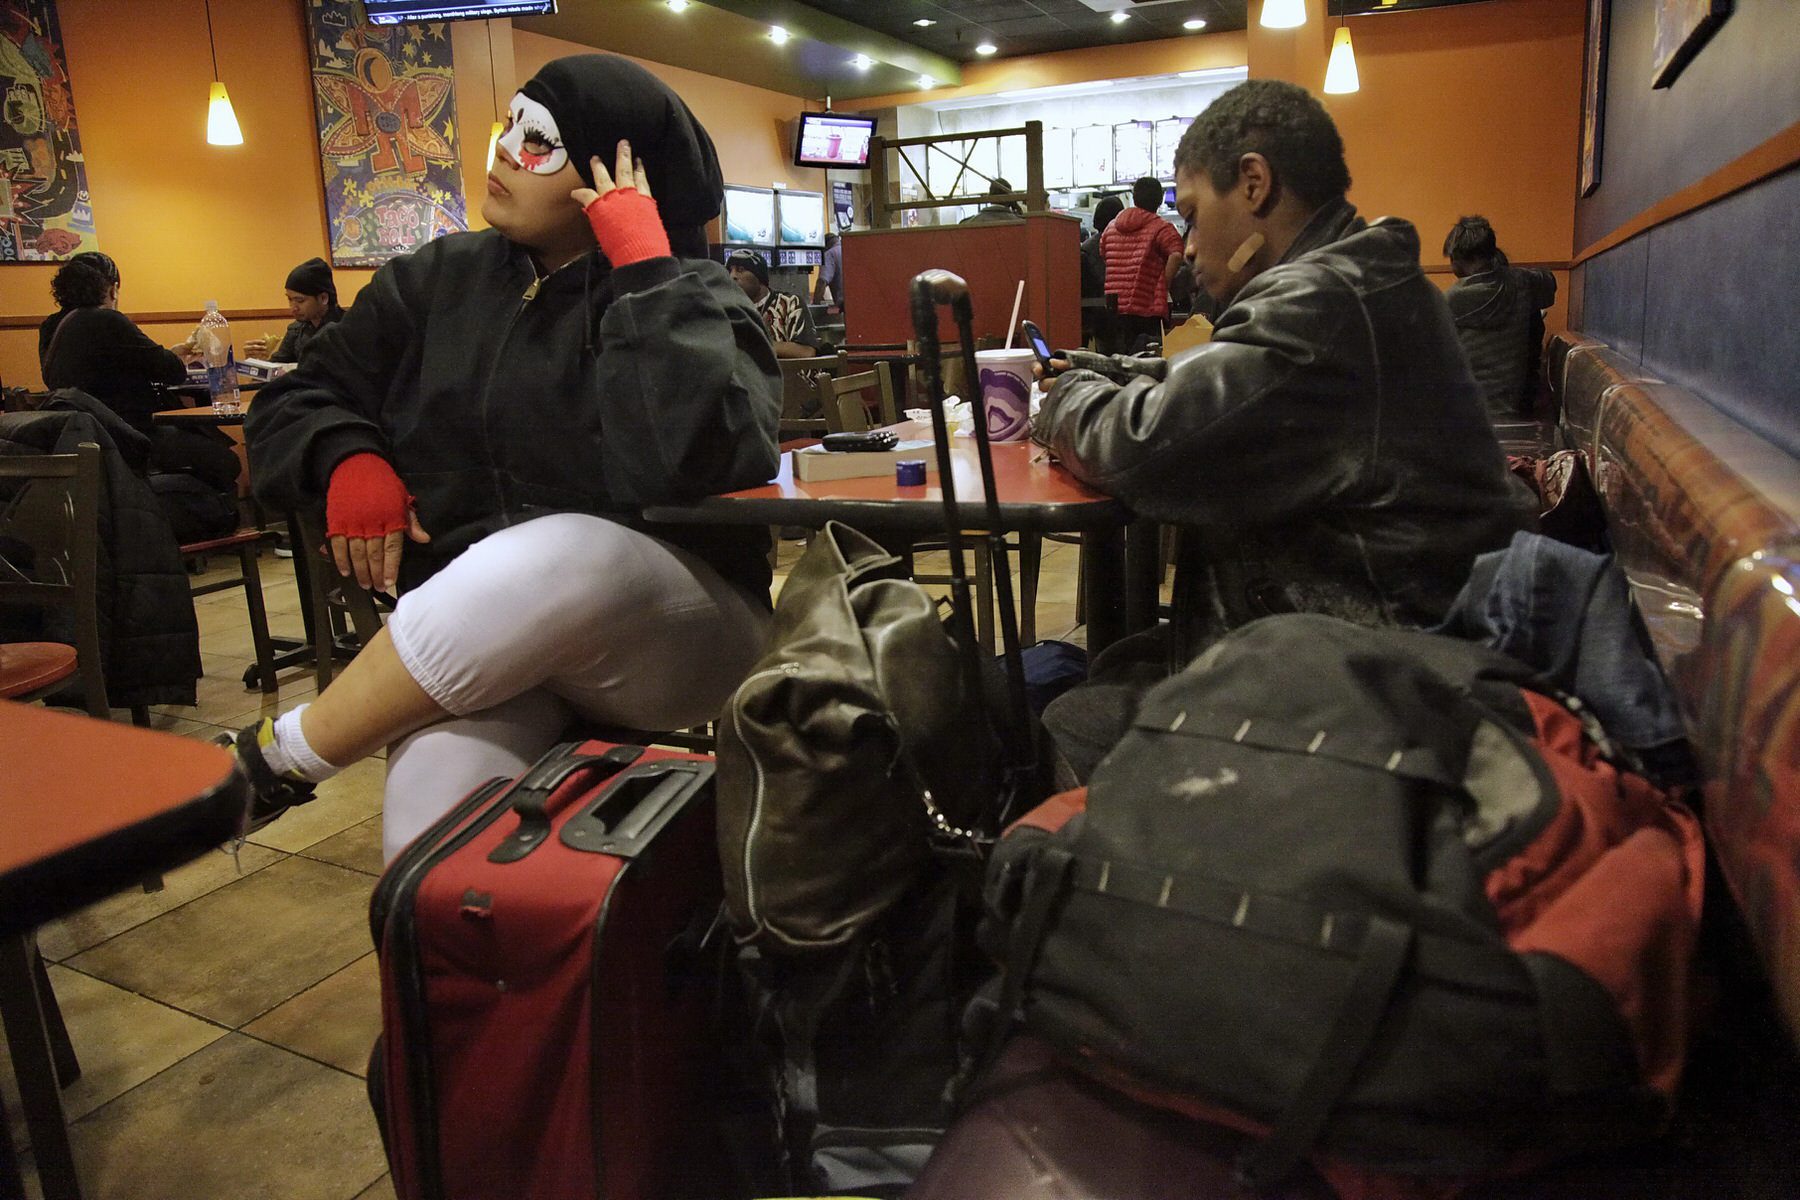 Queer youth sit with their belongings at a table in a fast food restaurant.